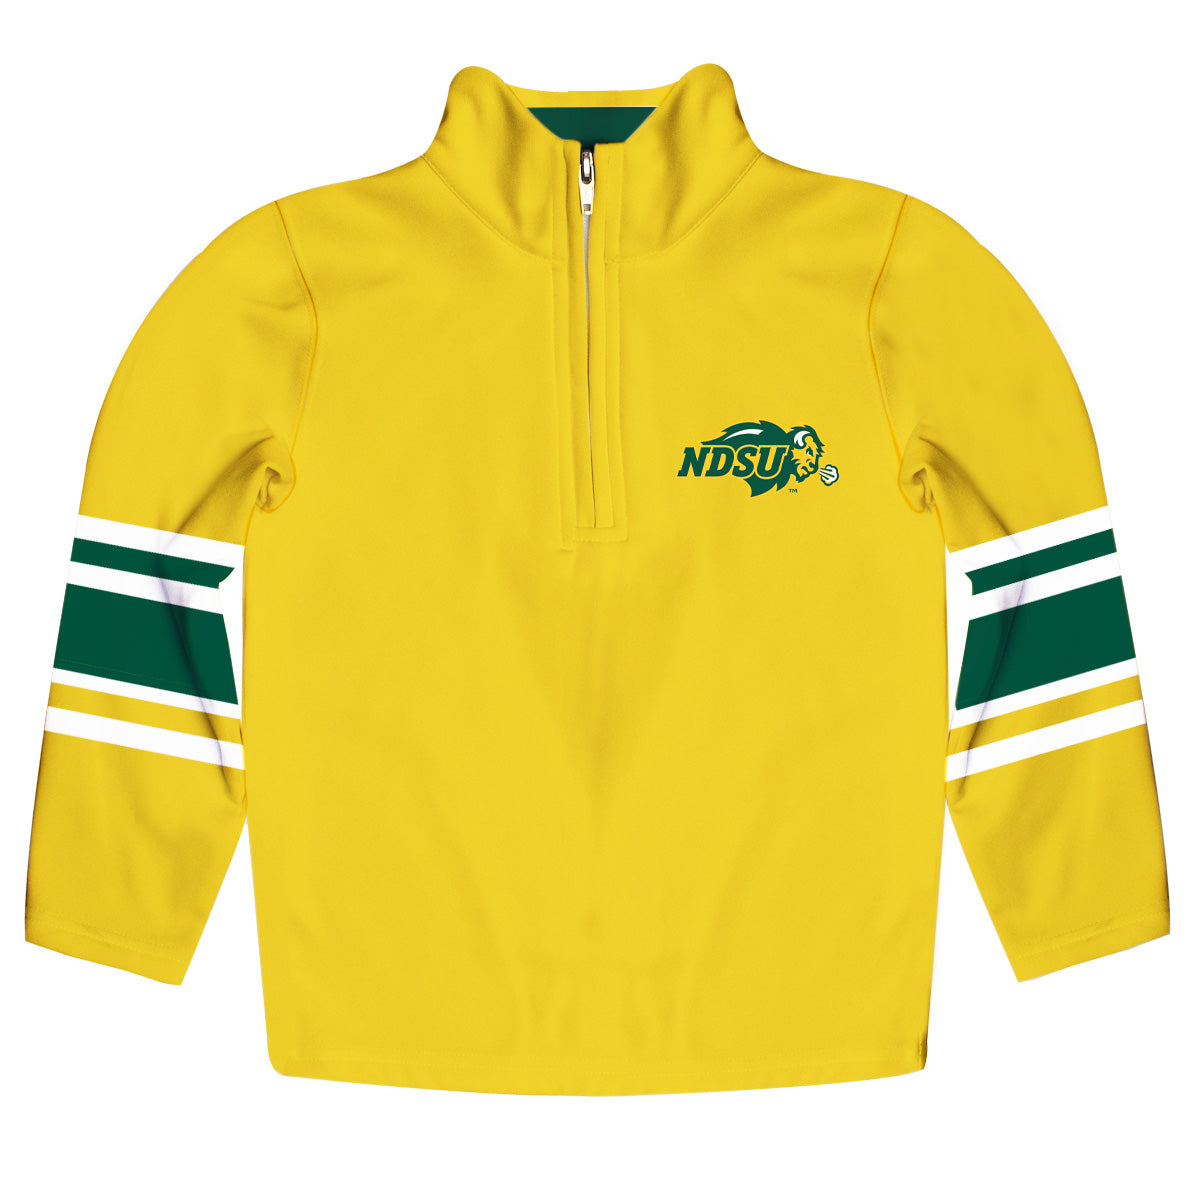 North Dakota Bison Game Day Yellow Quarter Zip Pullover for Infants Toddlers by Vive La Fete